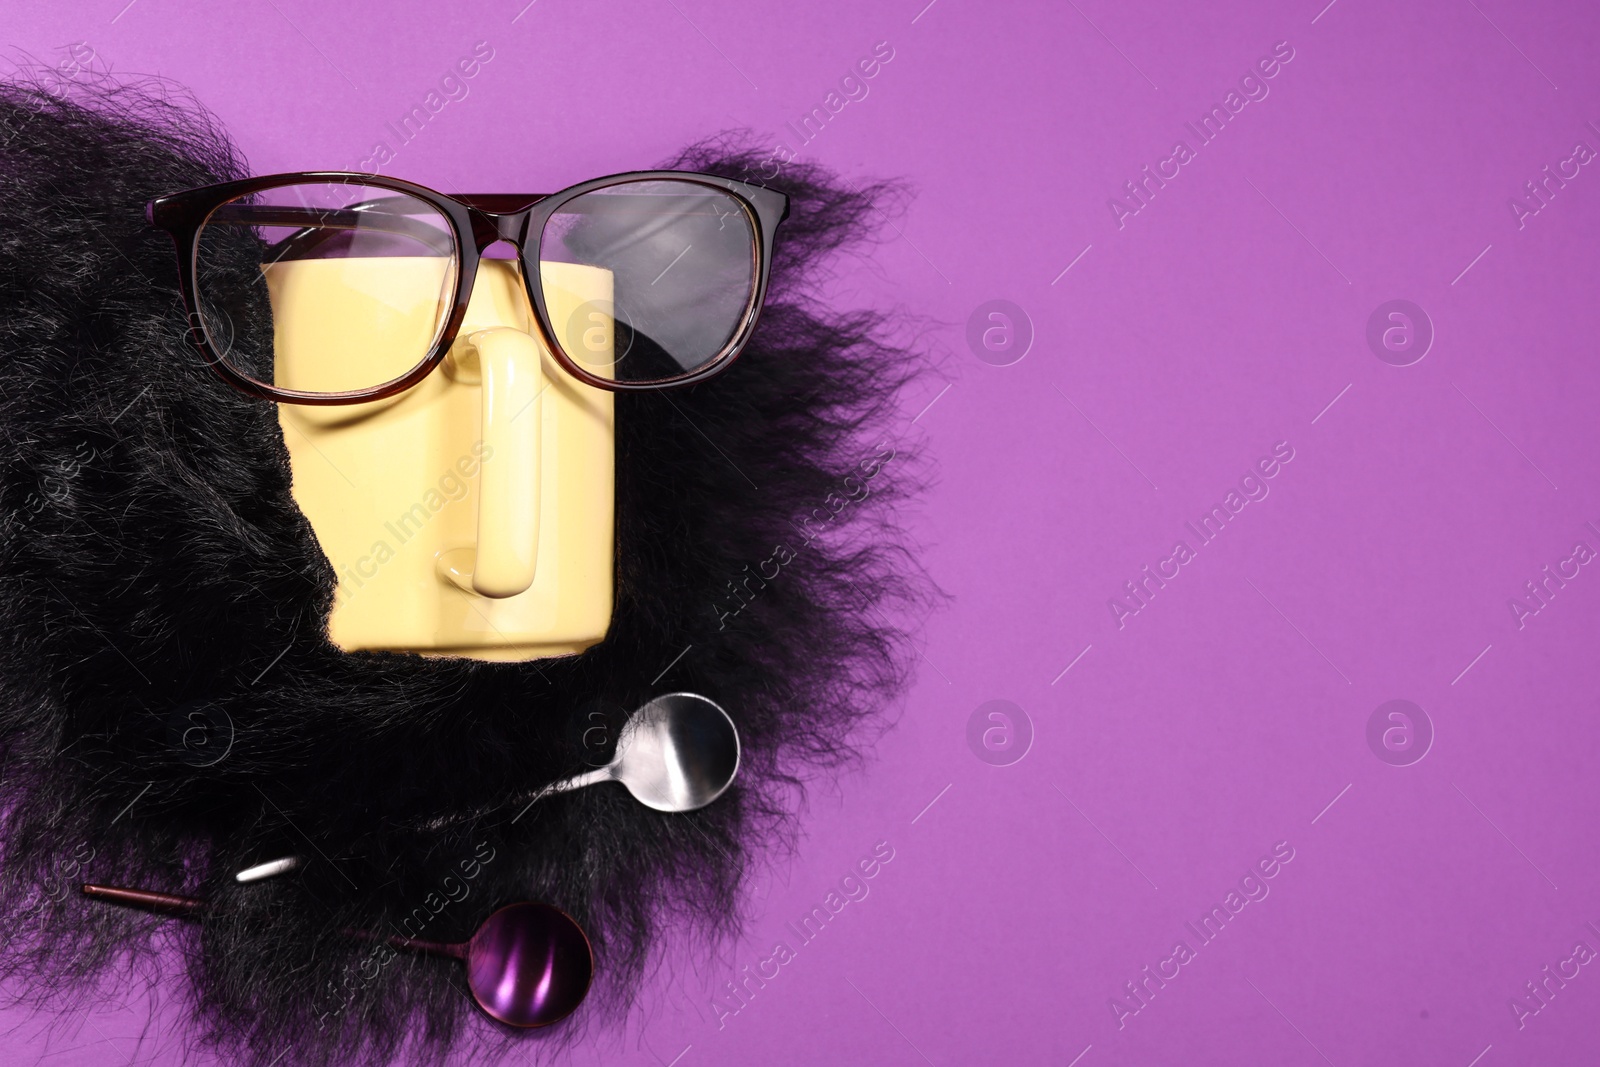 Photo of Man's face made of artificial beard, cup and glasses on purple background, top view. Space for text